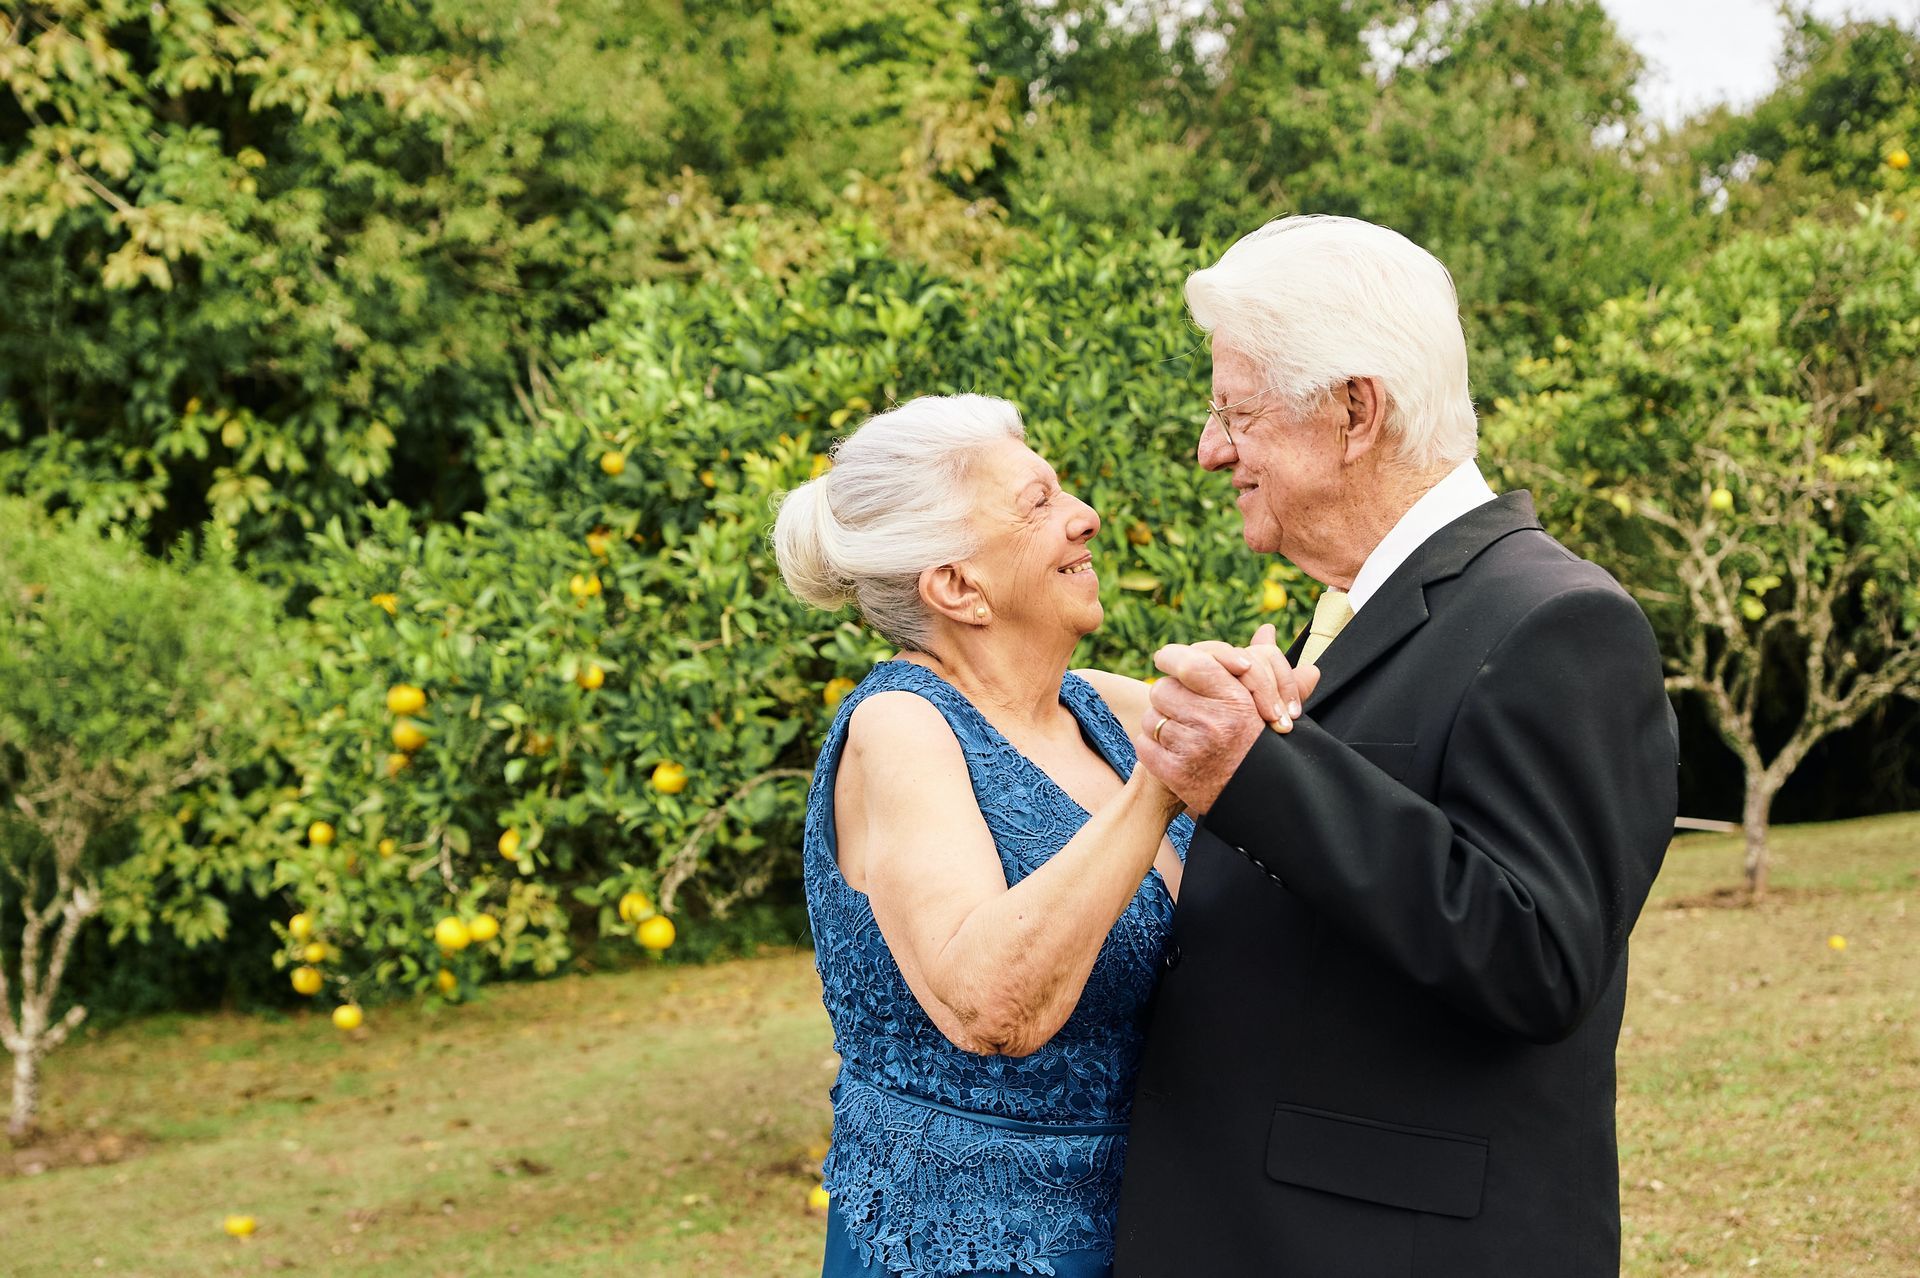 an elderly couple is dancing together in a park .